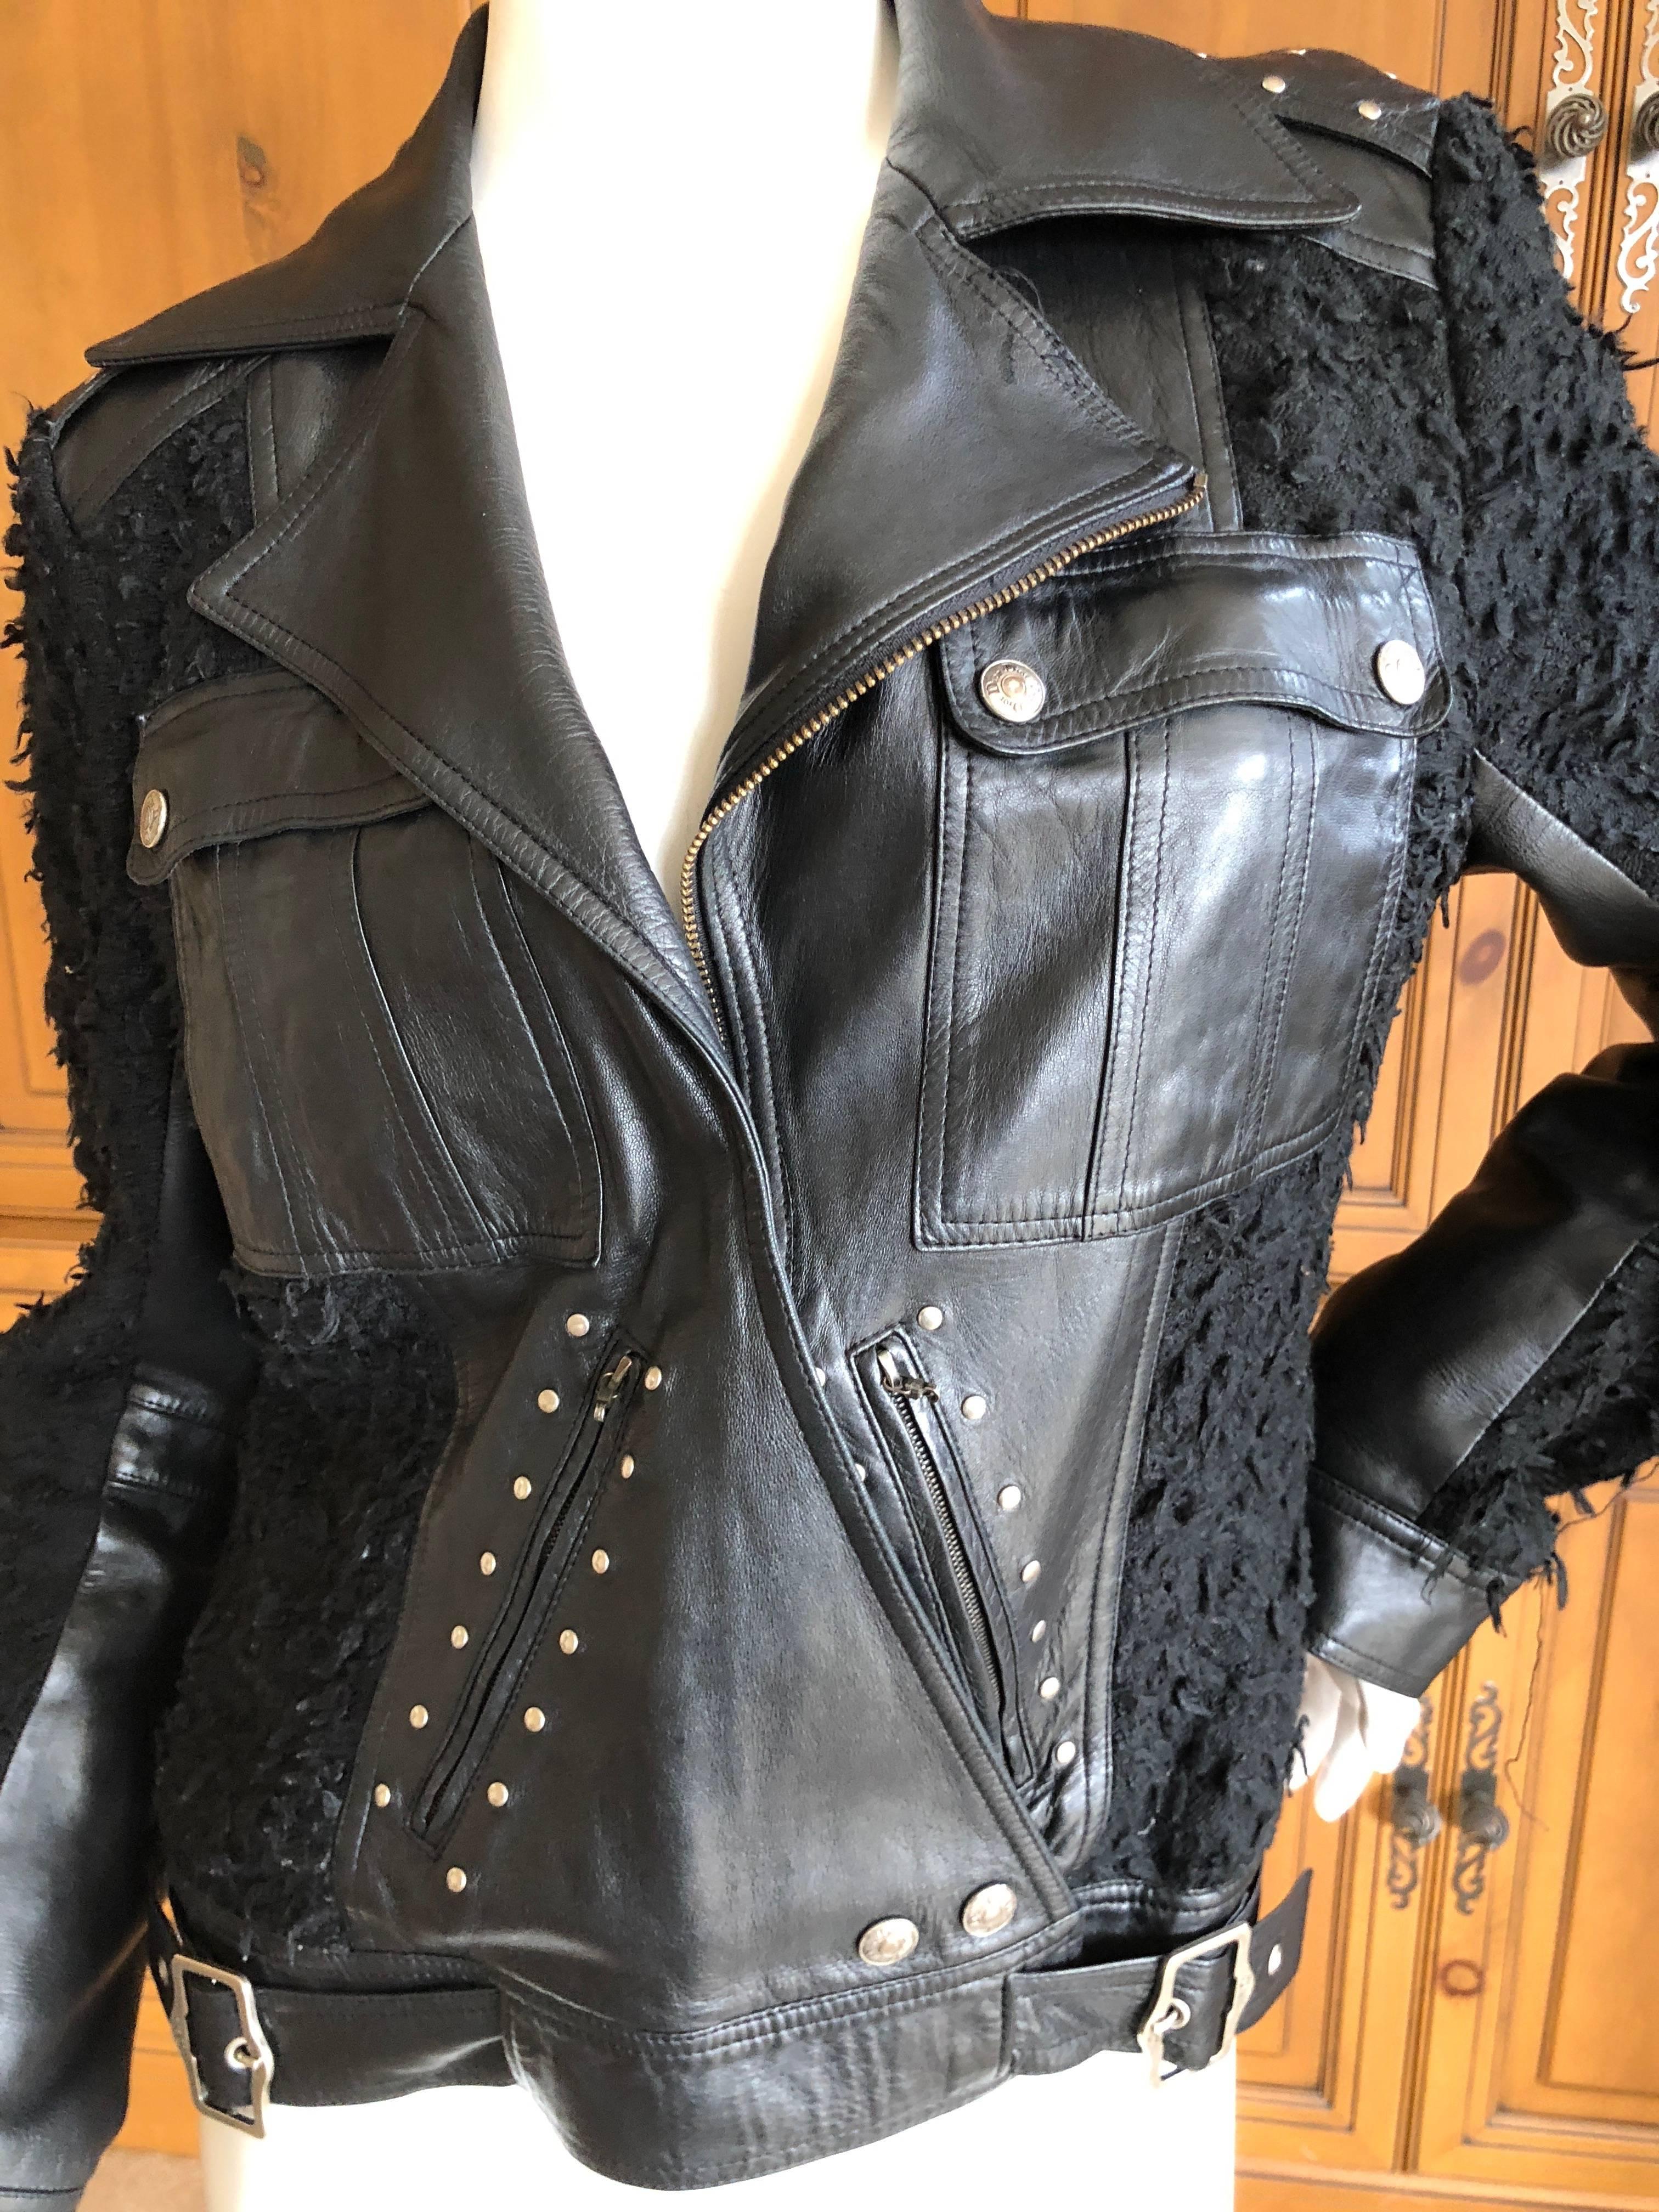 Christian Dior by Galliano Black Lambskin Leather Accented Moto Jacket  In Excellent Condition For Sale In Cloverdale, CA